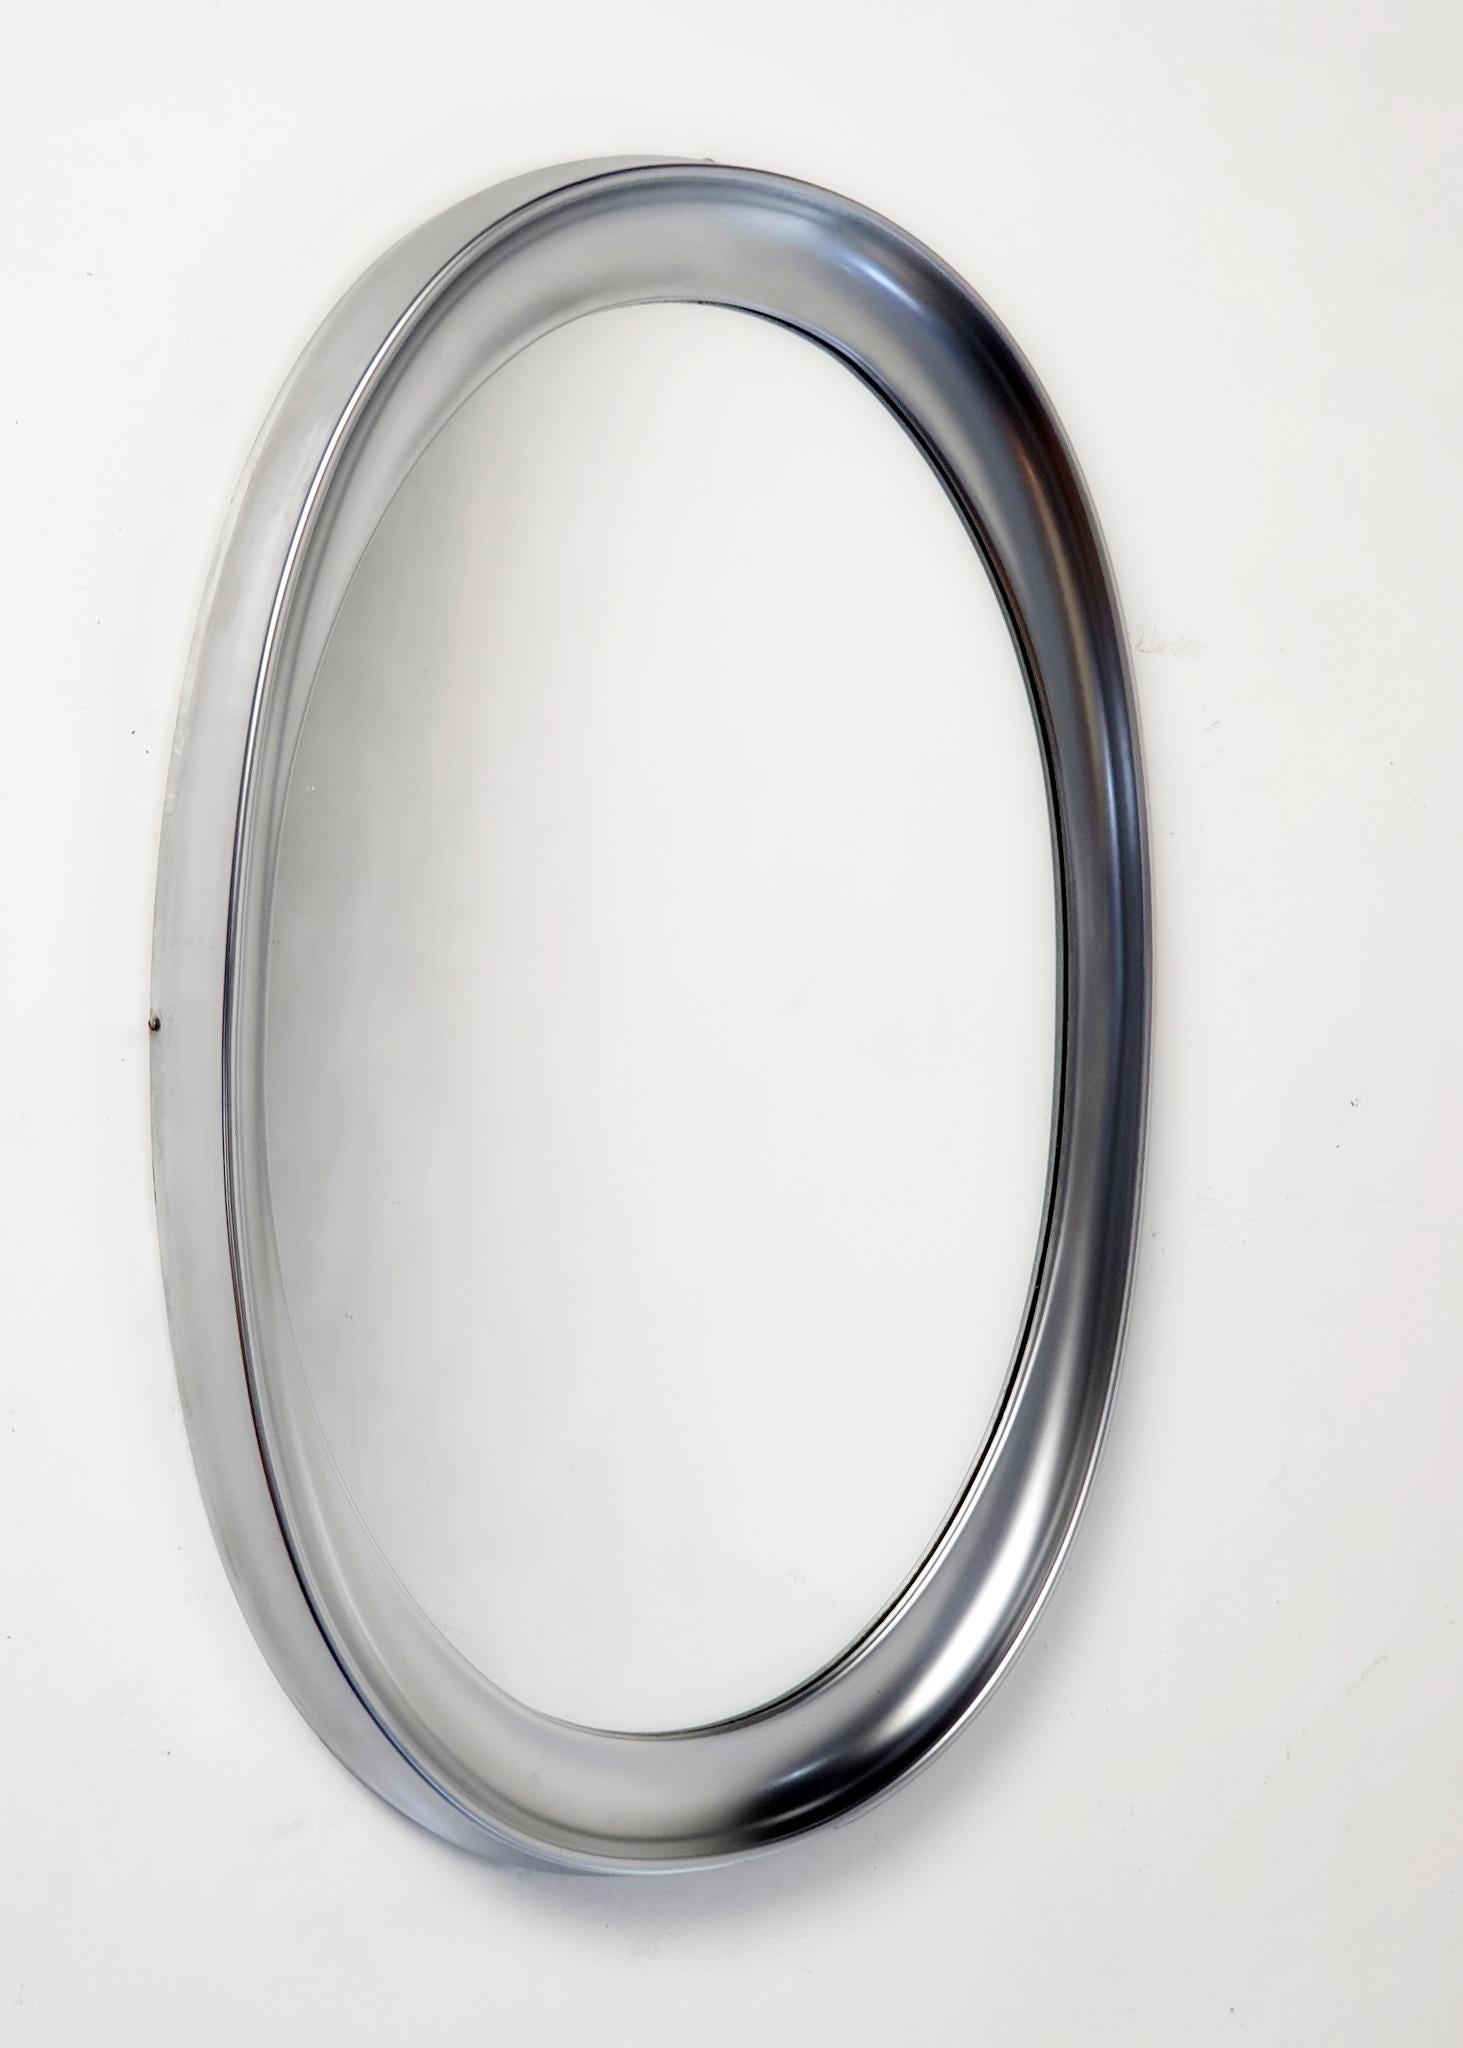 Midcentury large oval wall mirror from the 